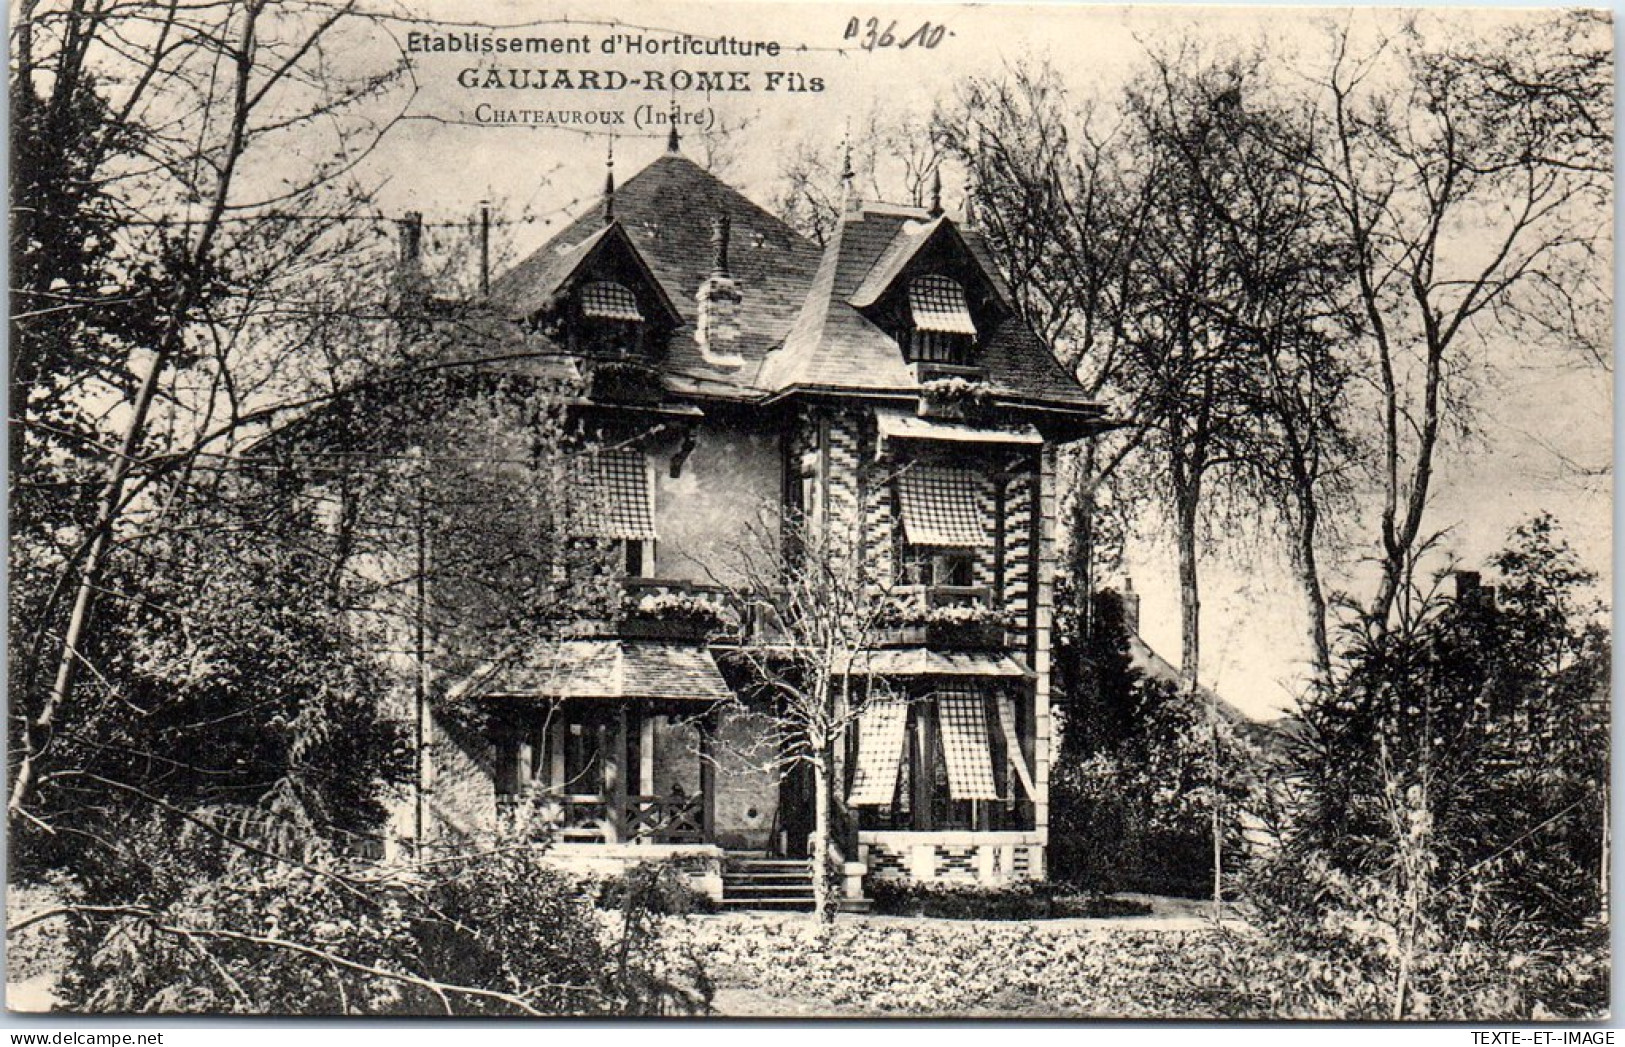 36 CHATEAUROUX - Gaujard Rome Fils, Horticulture. - Chateauroux